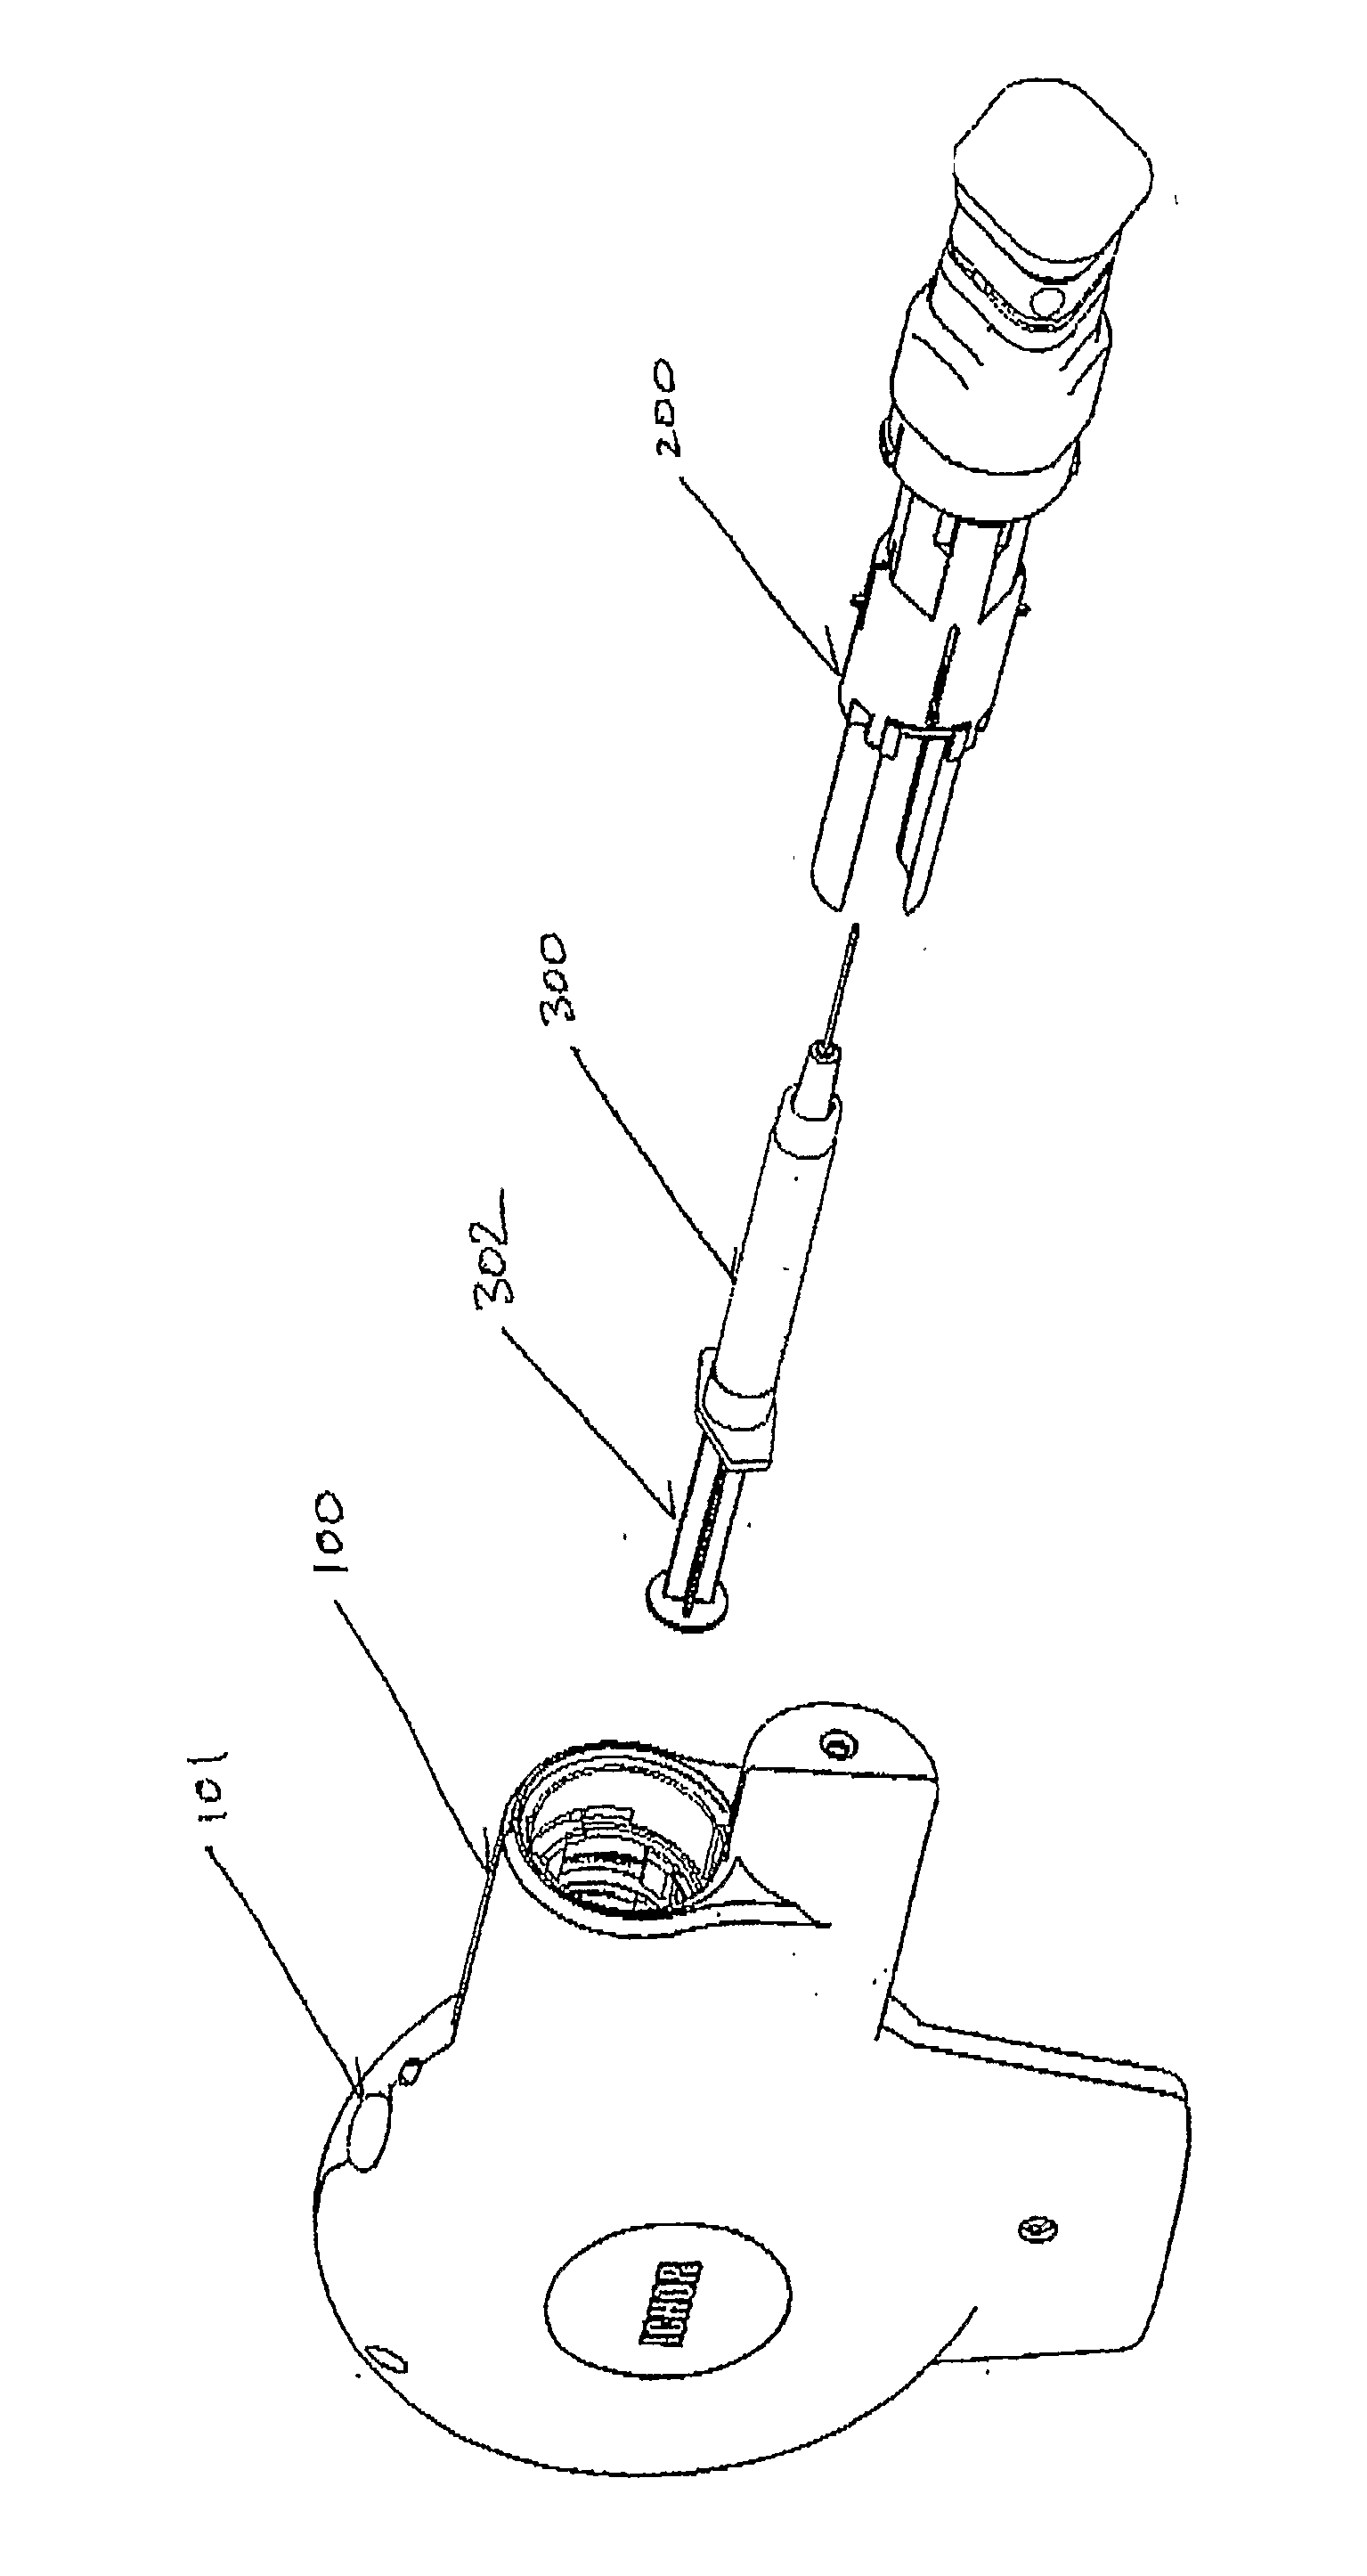 Apparatus for electrically mediated delivery of therapeutic agents